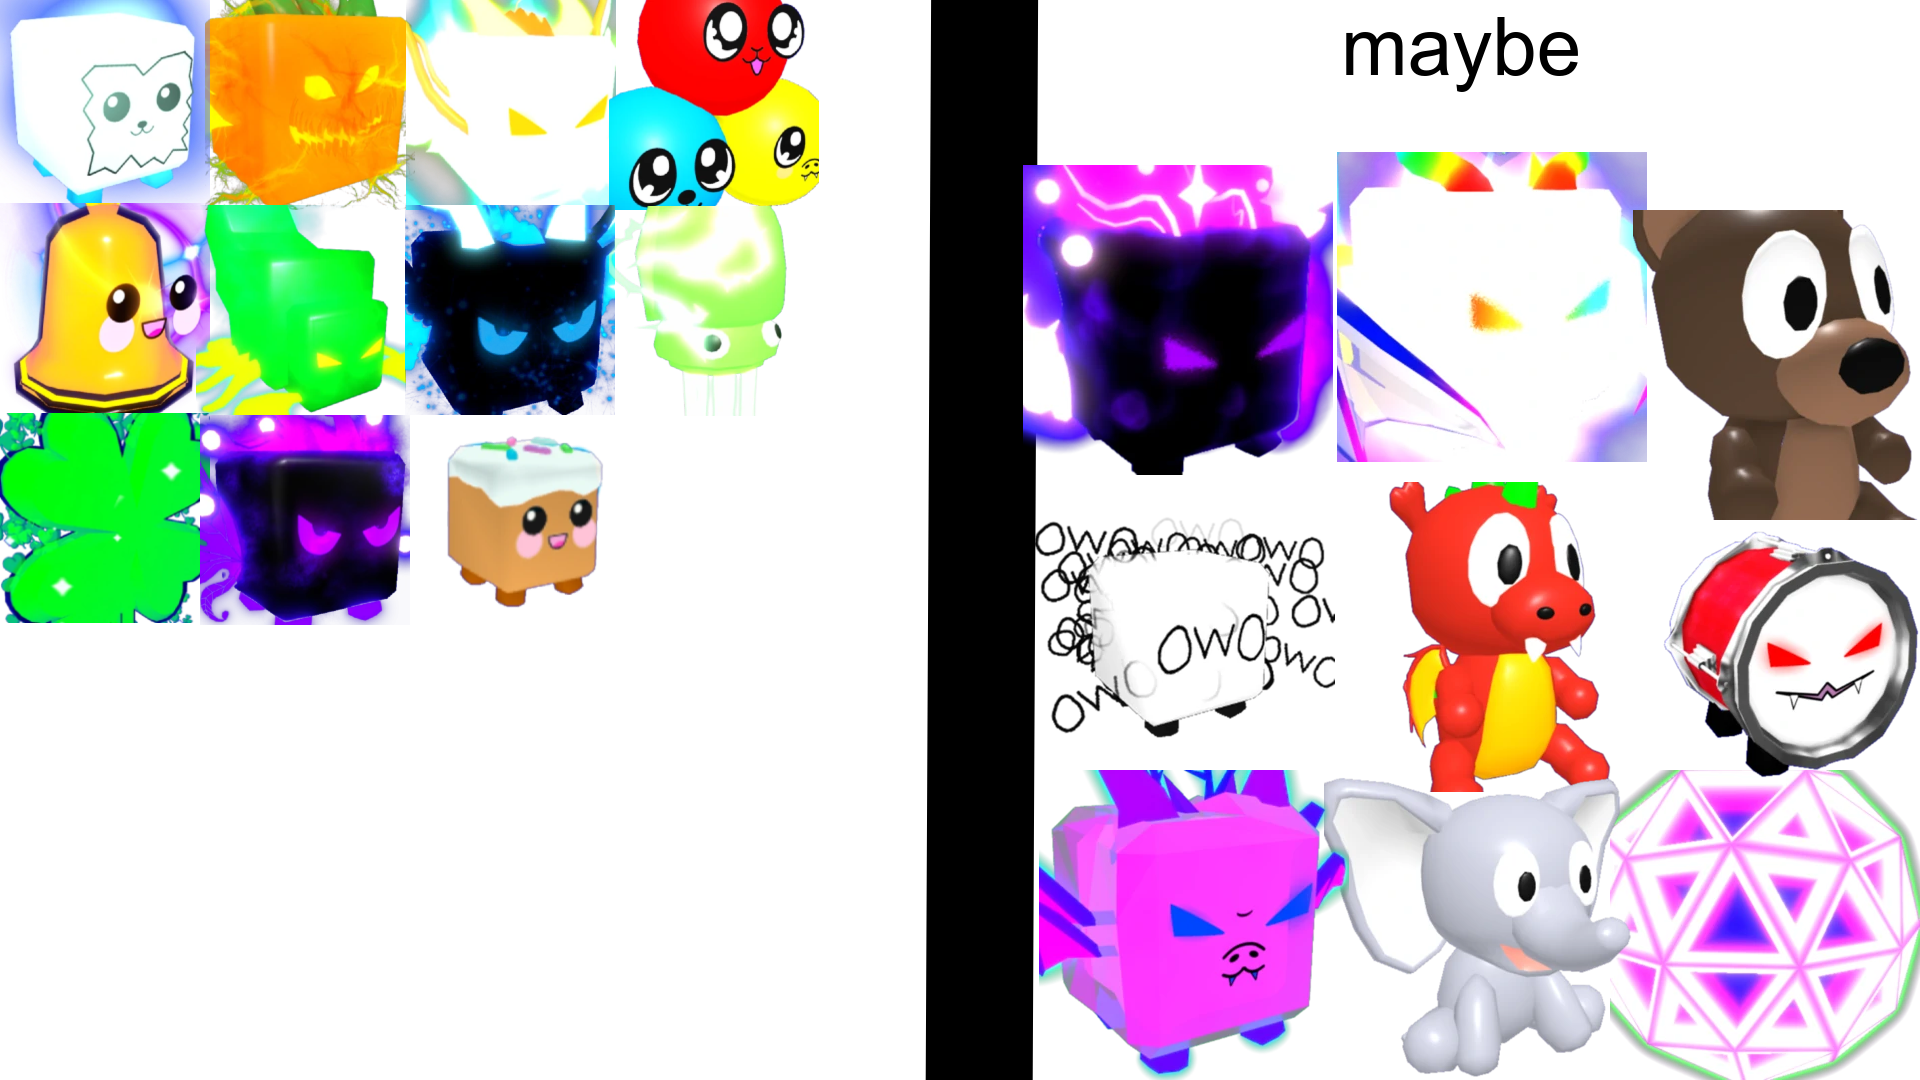 Csvzmvc5emjxcm - should we try this httpsghost simulator robloxfandom